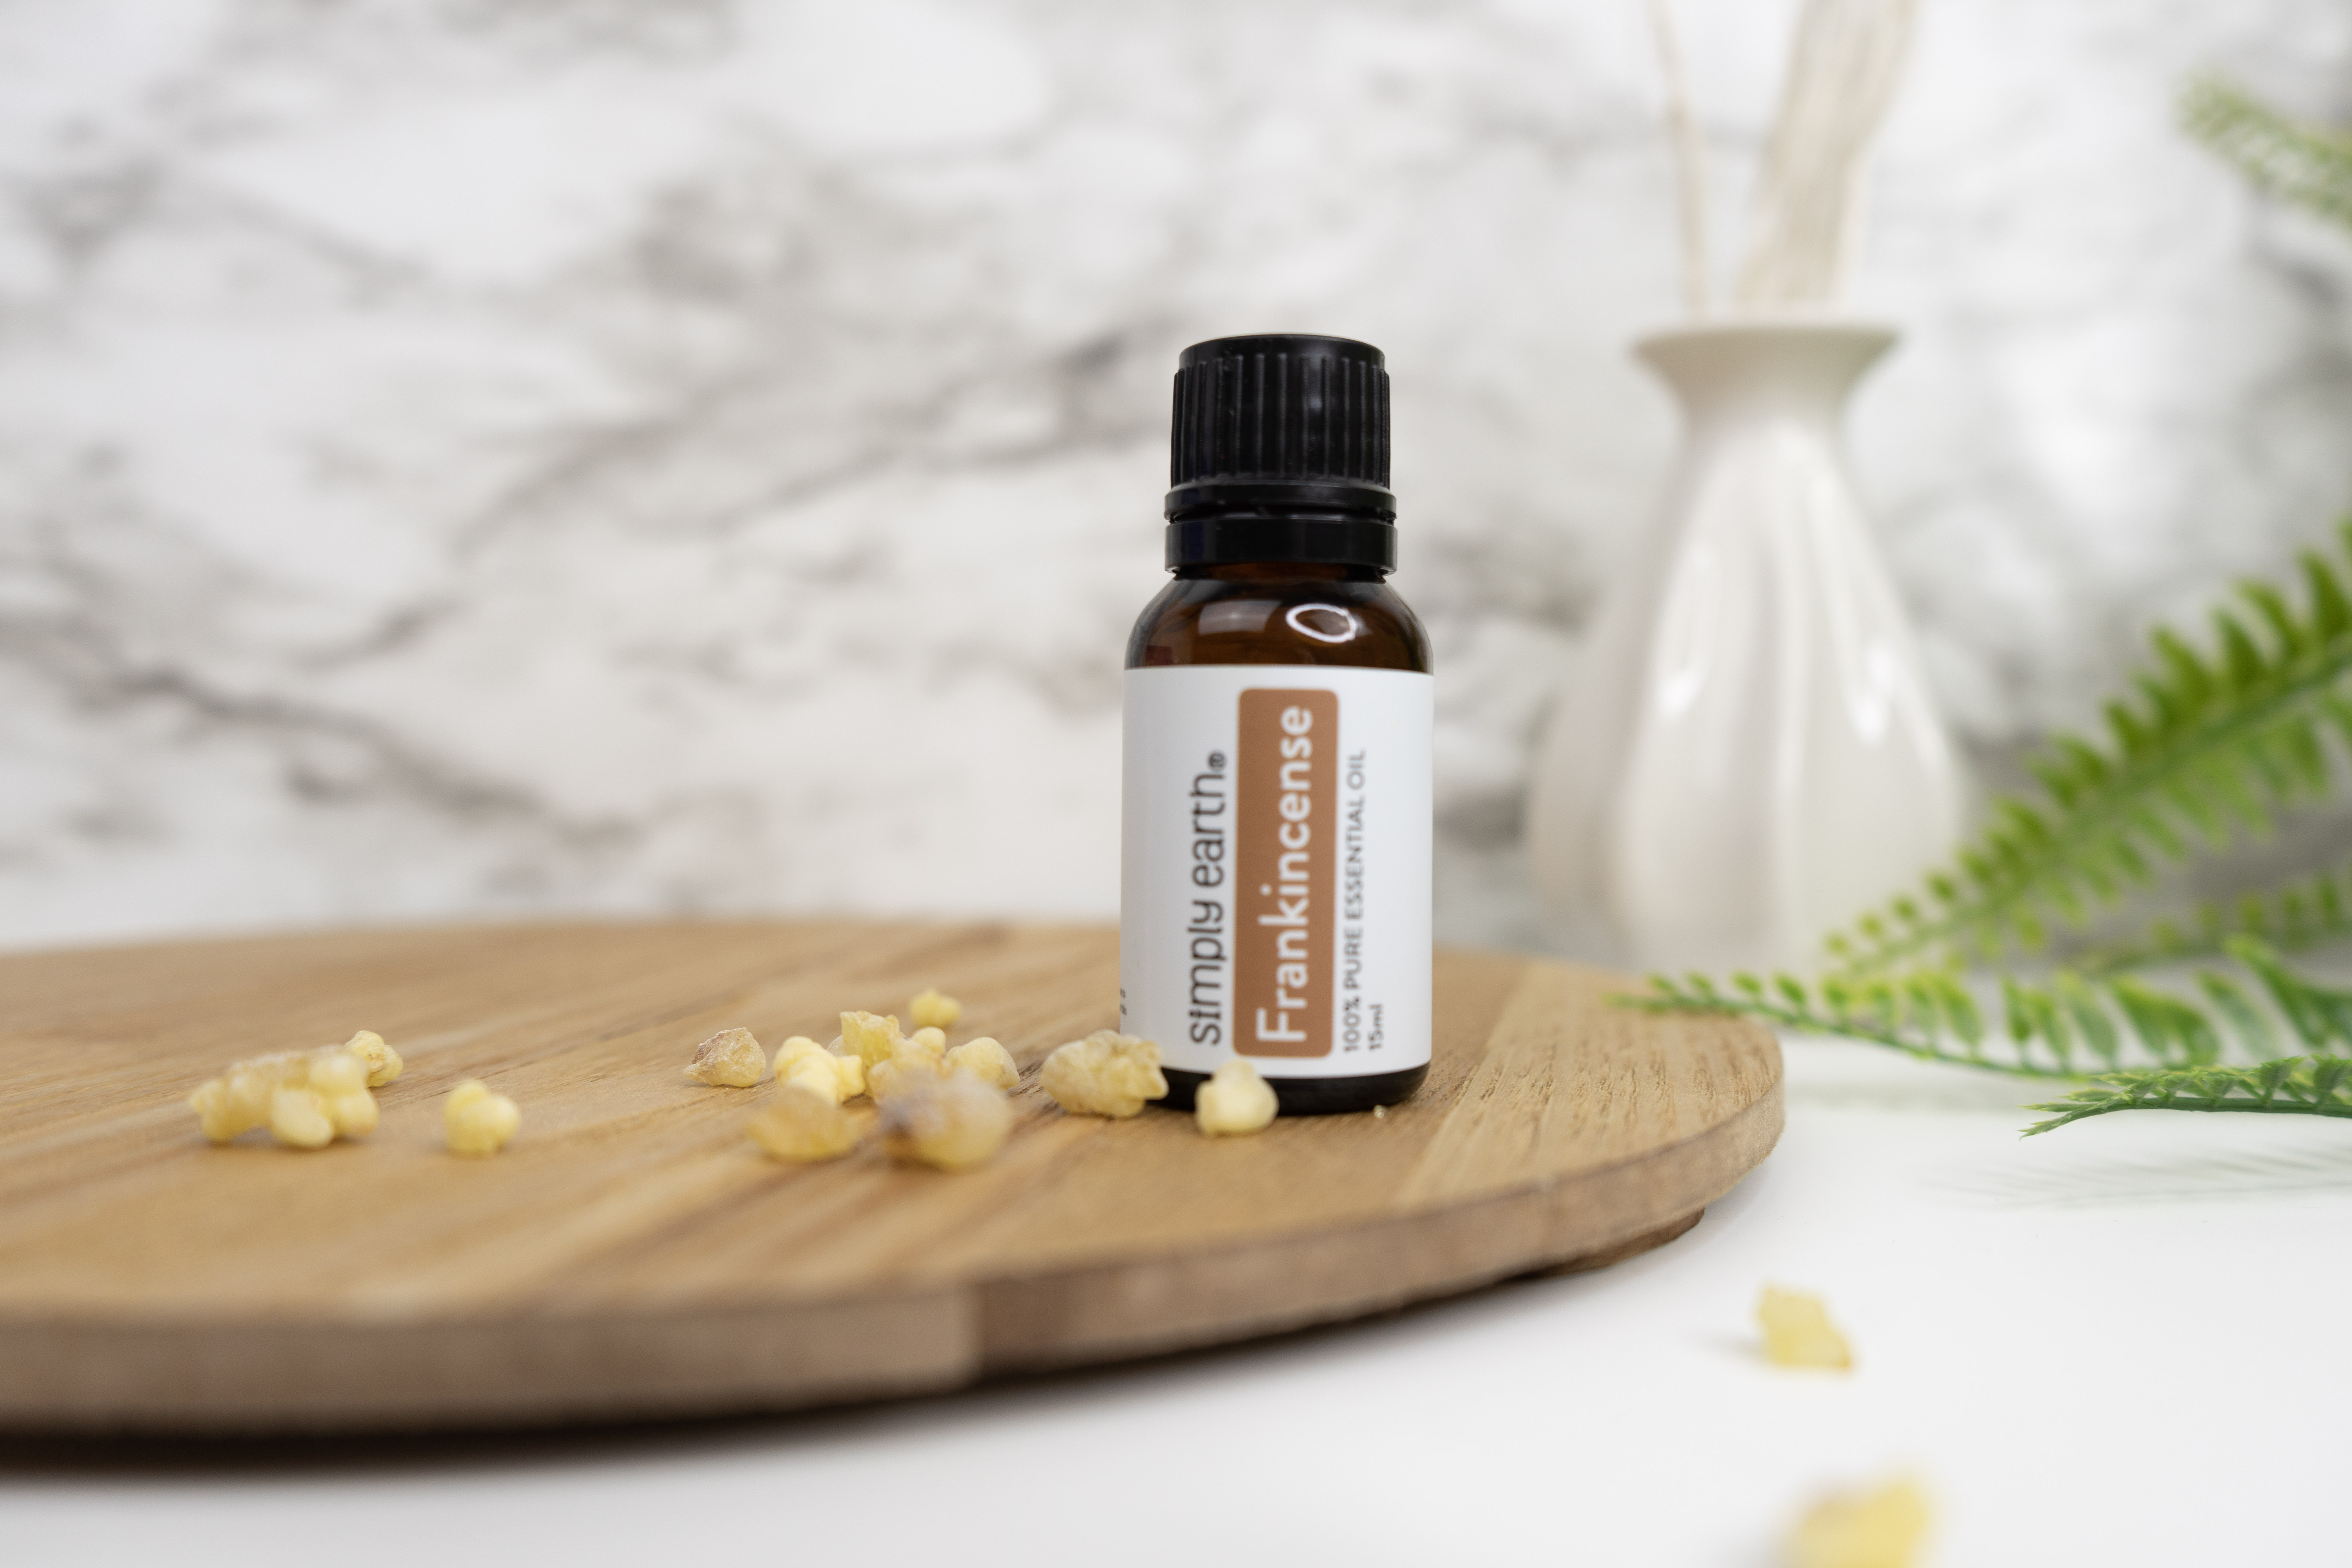 Benefits of Frankincense Essential Oil